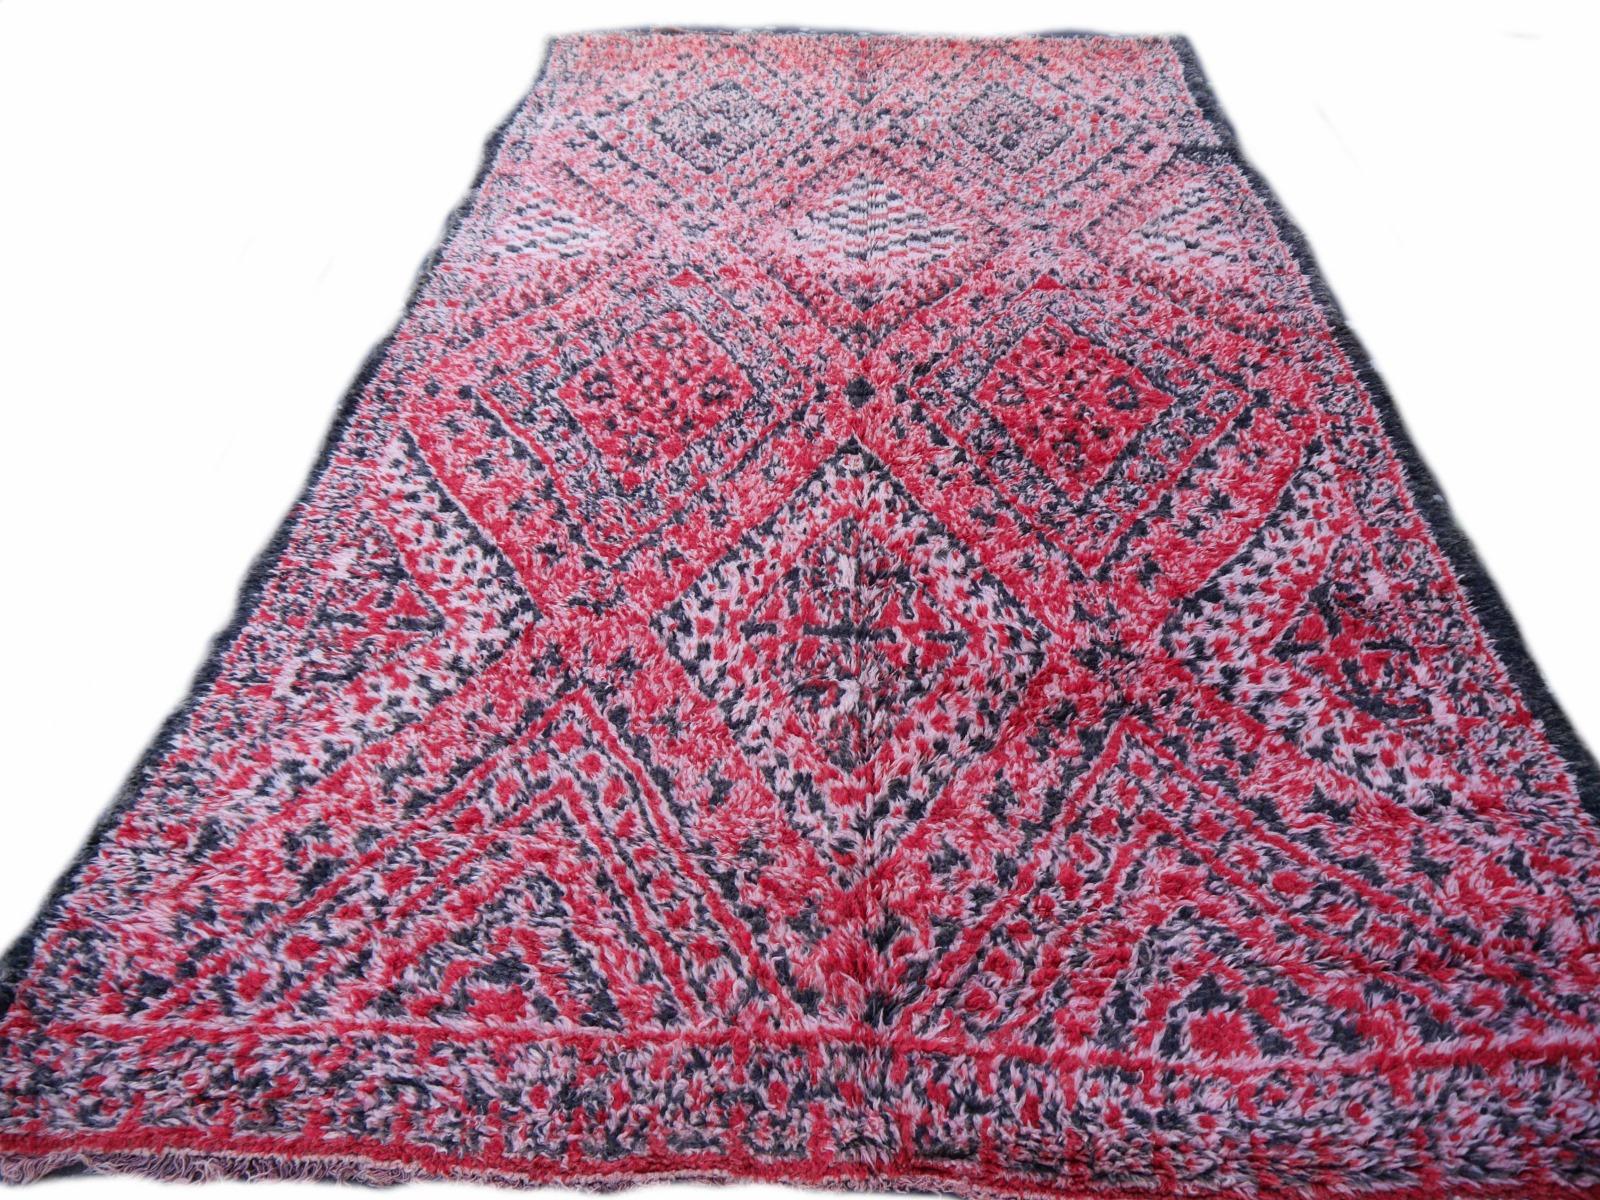 Moroccan Vintage Rug North African Diamond Design Wool Red Pink Charcoal White For Sale 4